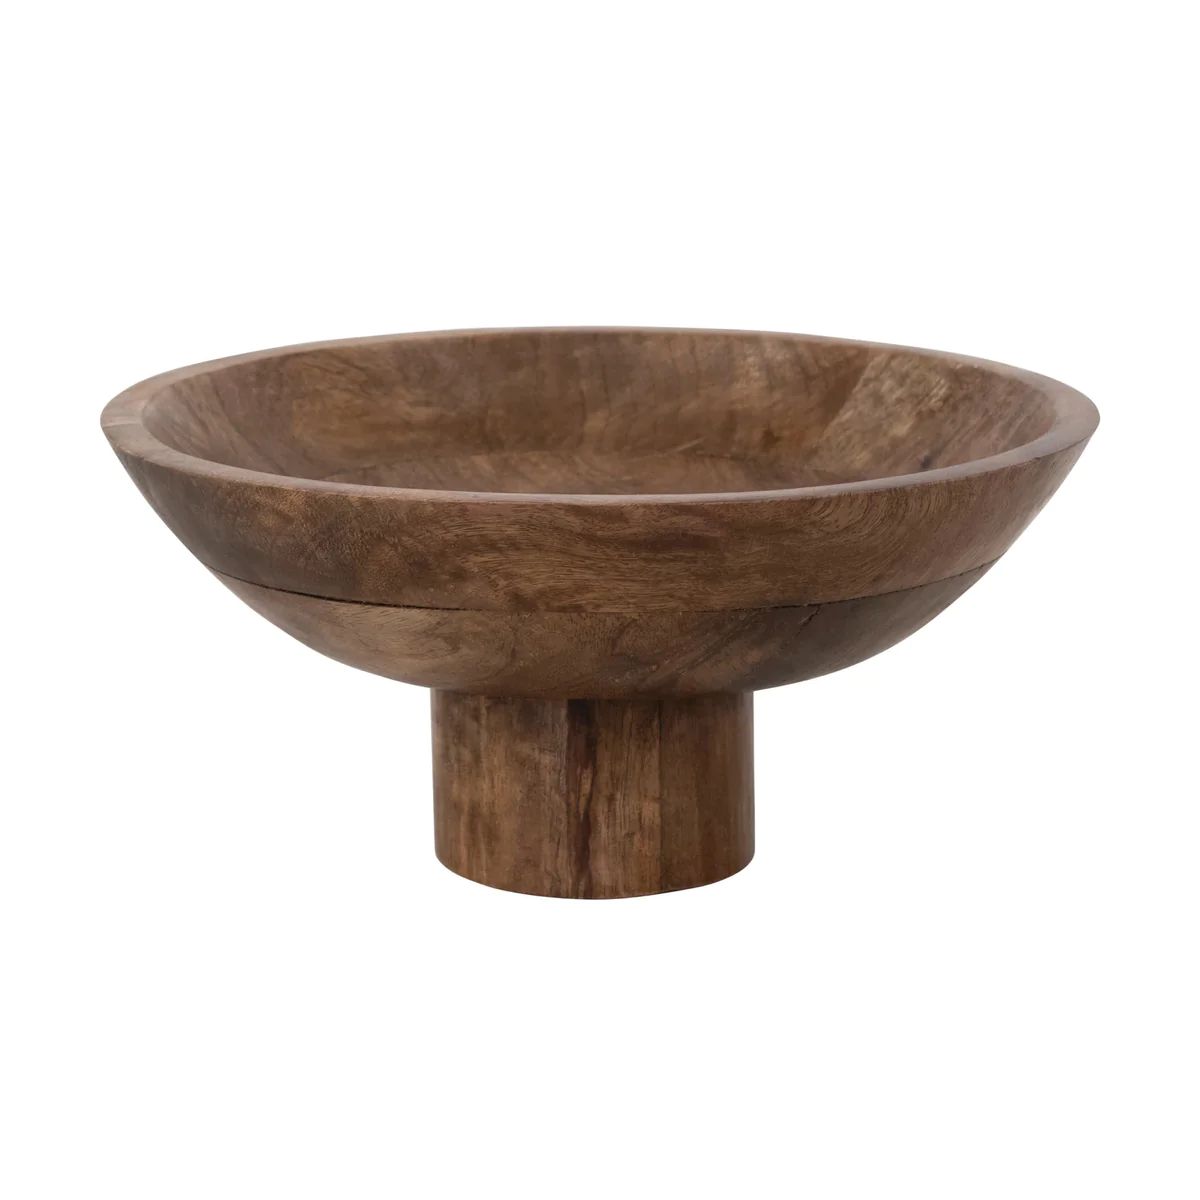 Footed Mango Wood Bowl | APIARY by The Busy Bee